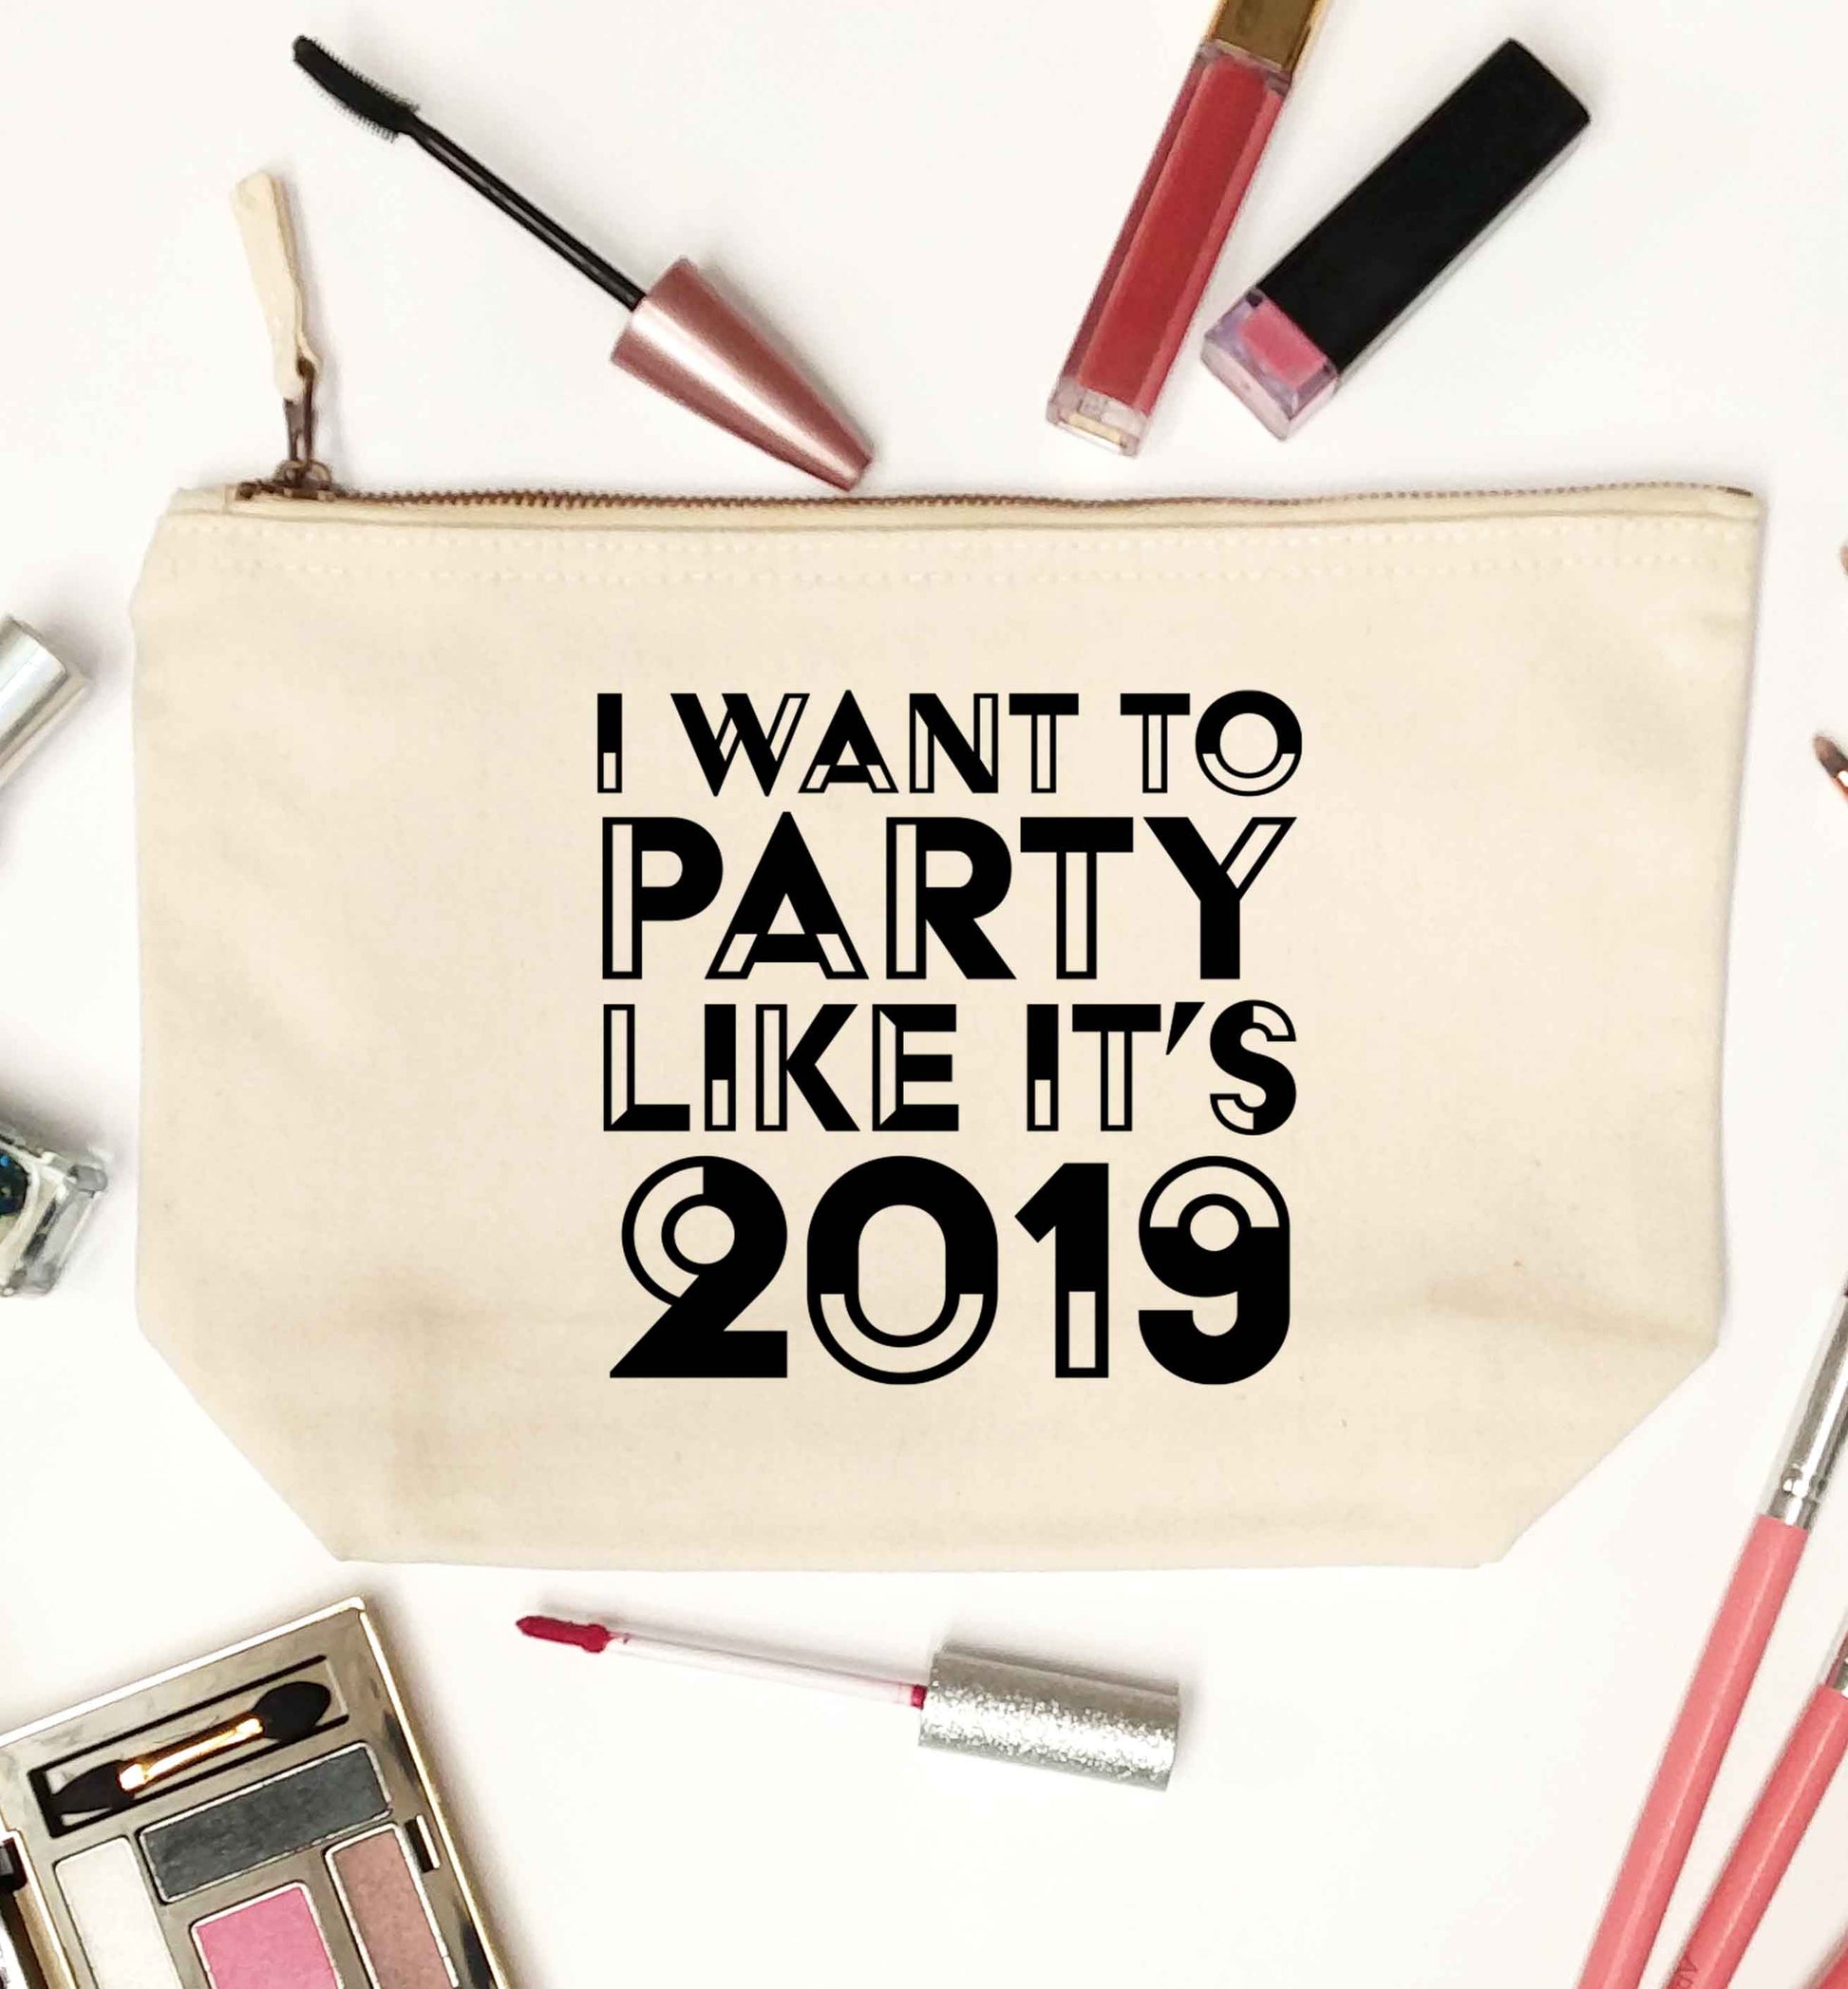 I want to party like it's 2019 natural makeup bag